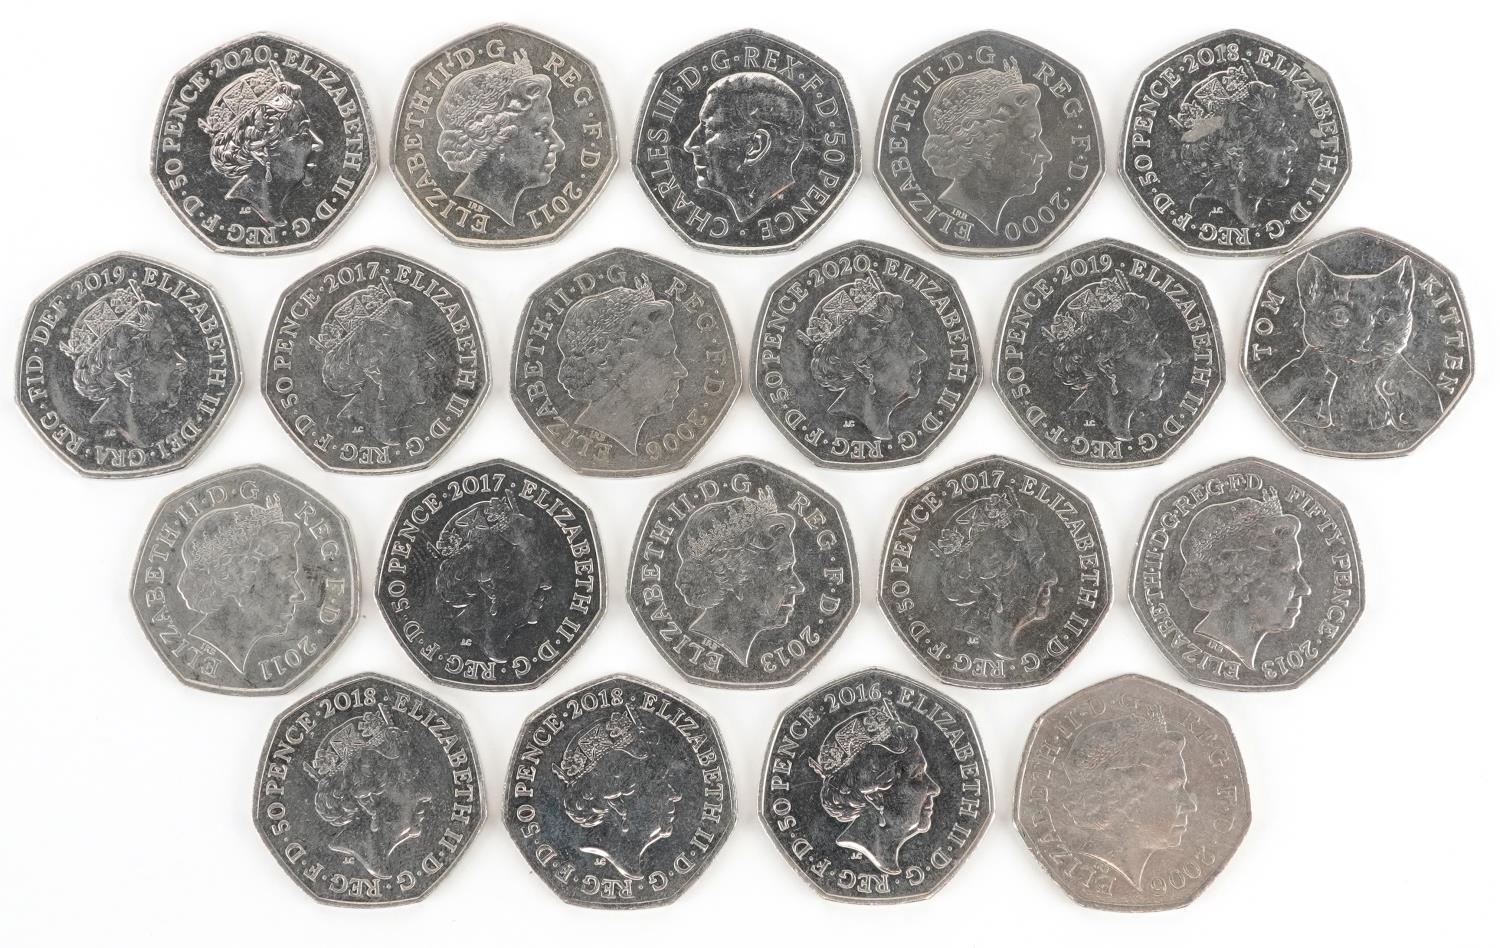 Twenty Elizabeth II fifty pence pieces, various designs including London 2012 Olympics and - Image 4 of 6